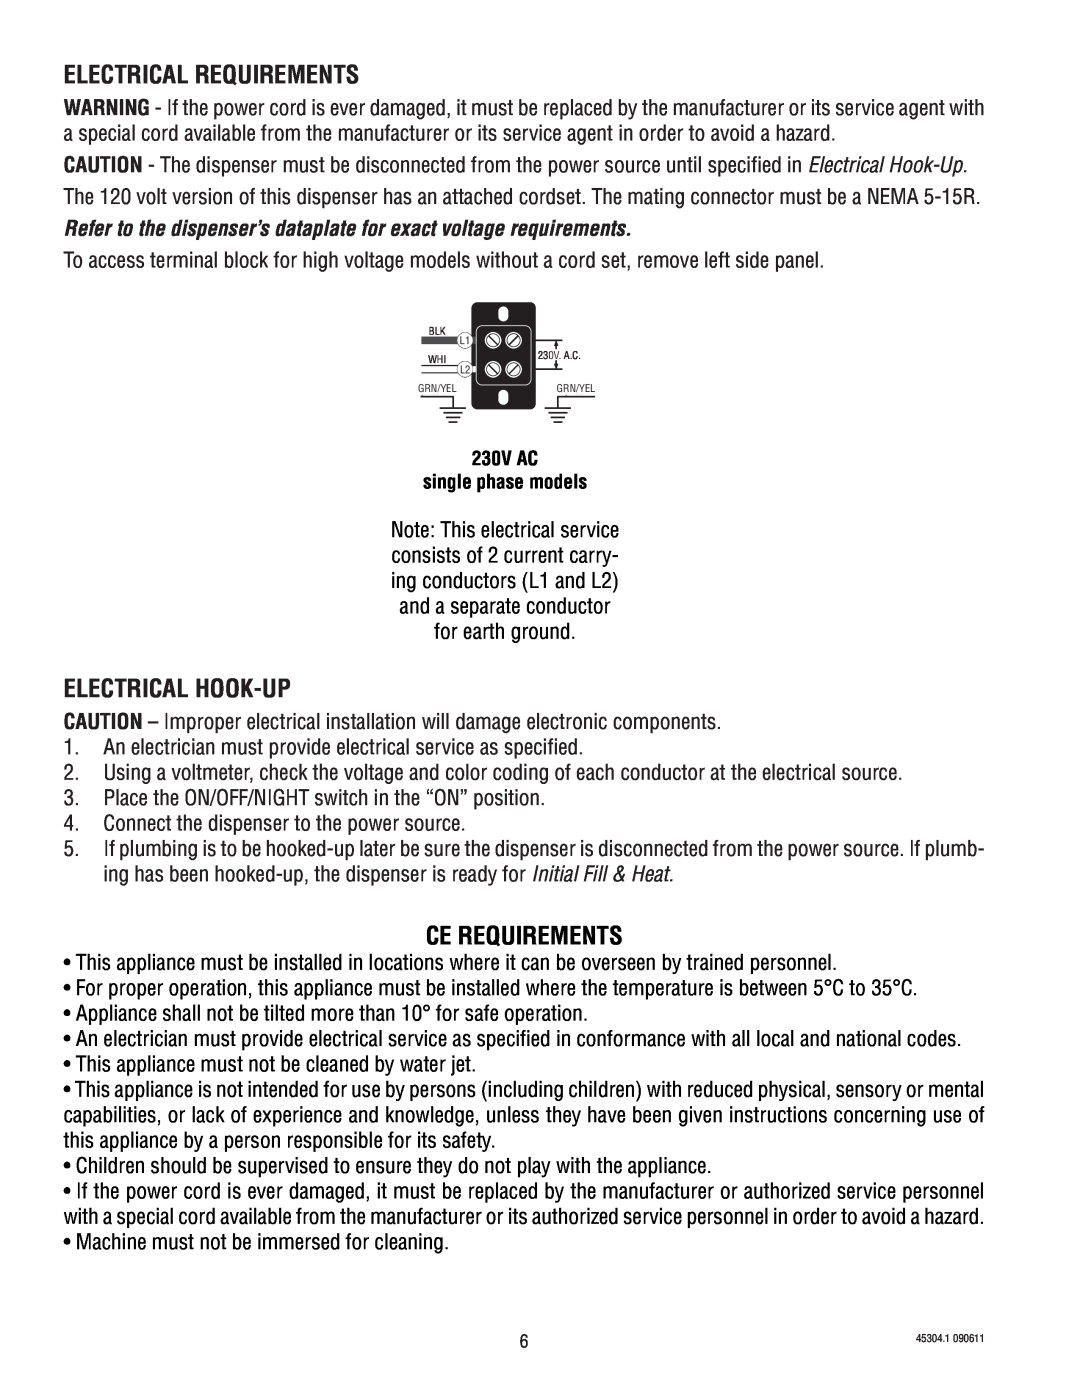 Bunn 14 manual Electrical Requirements, Electrical Hook-Up, Ce Requirements 